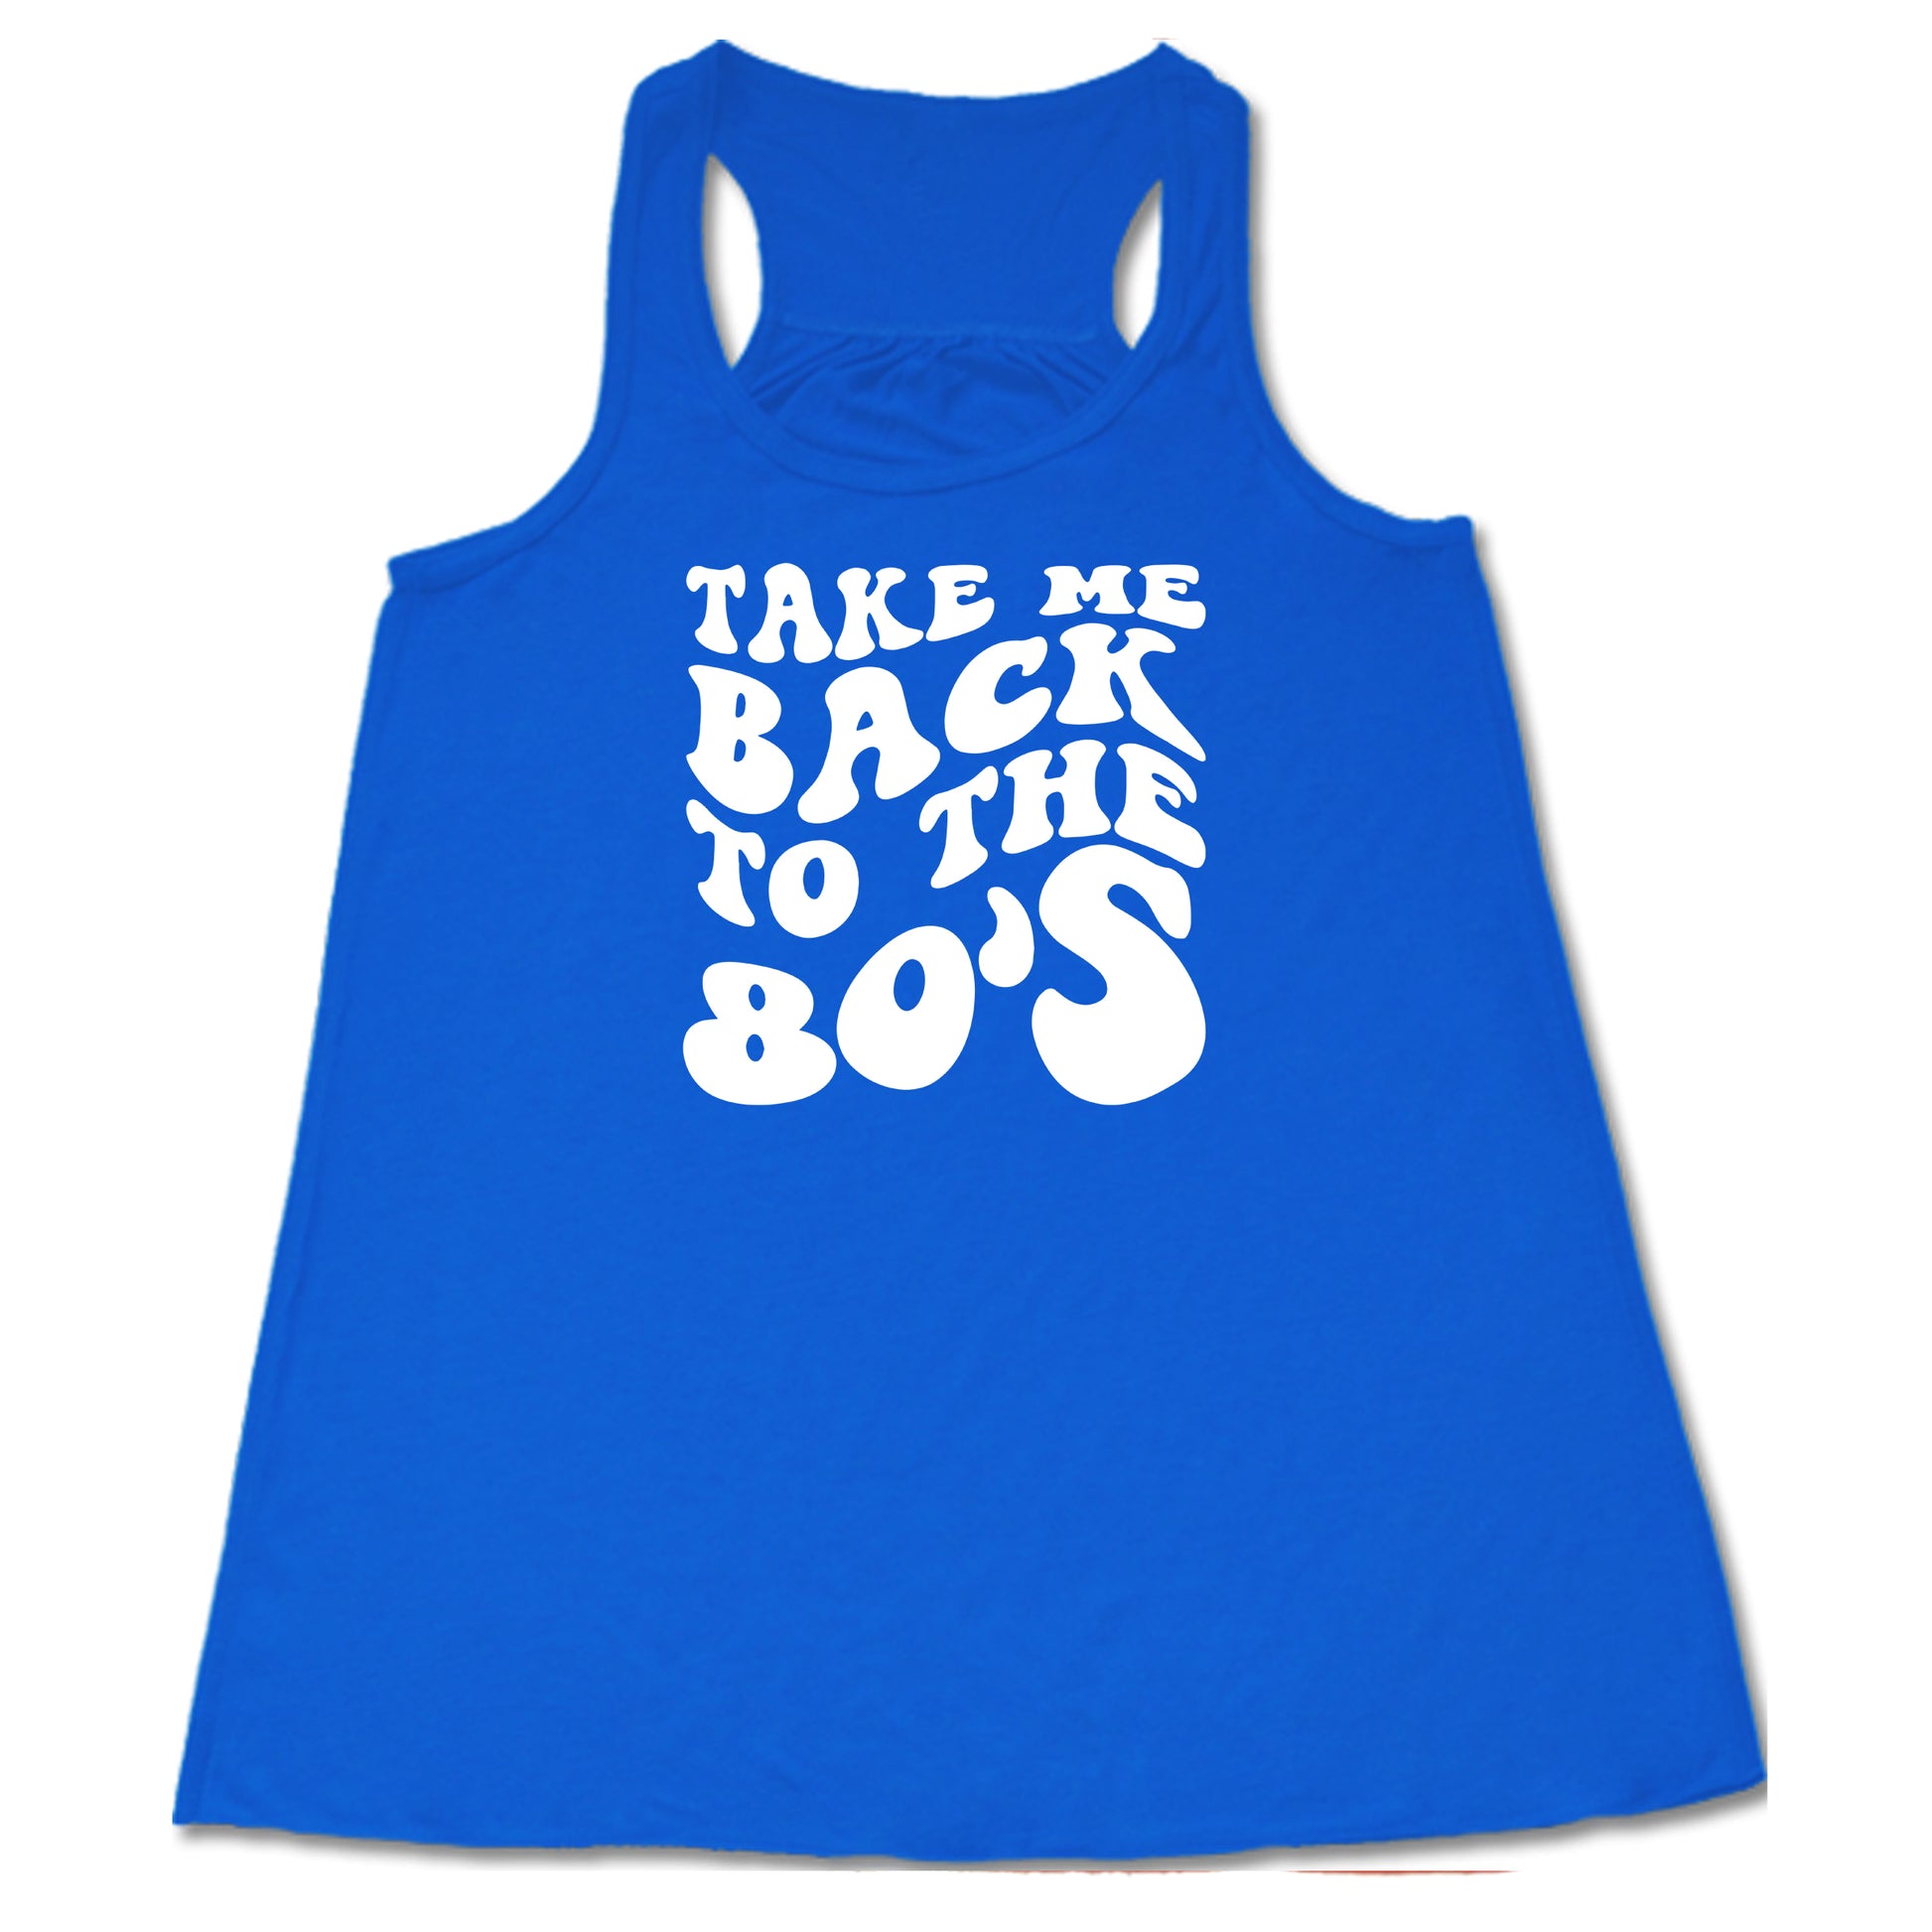 take me back to the 80's quote blue racerback shirt